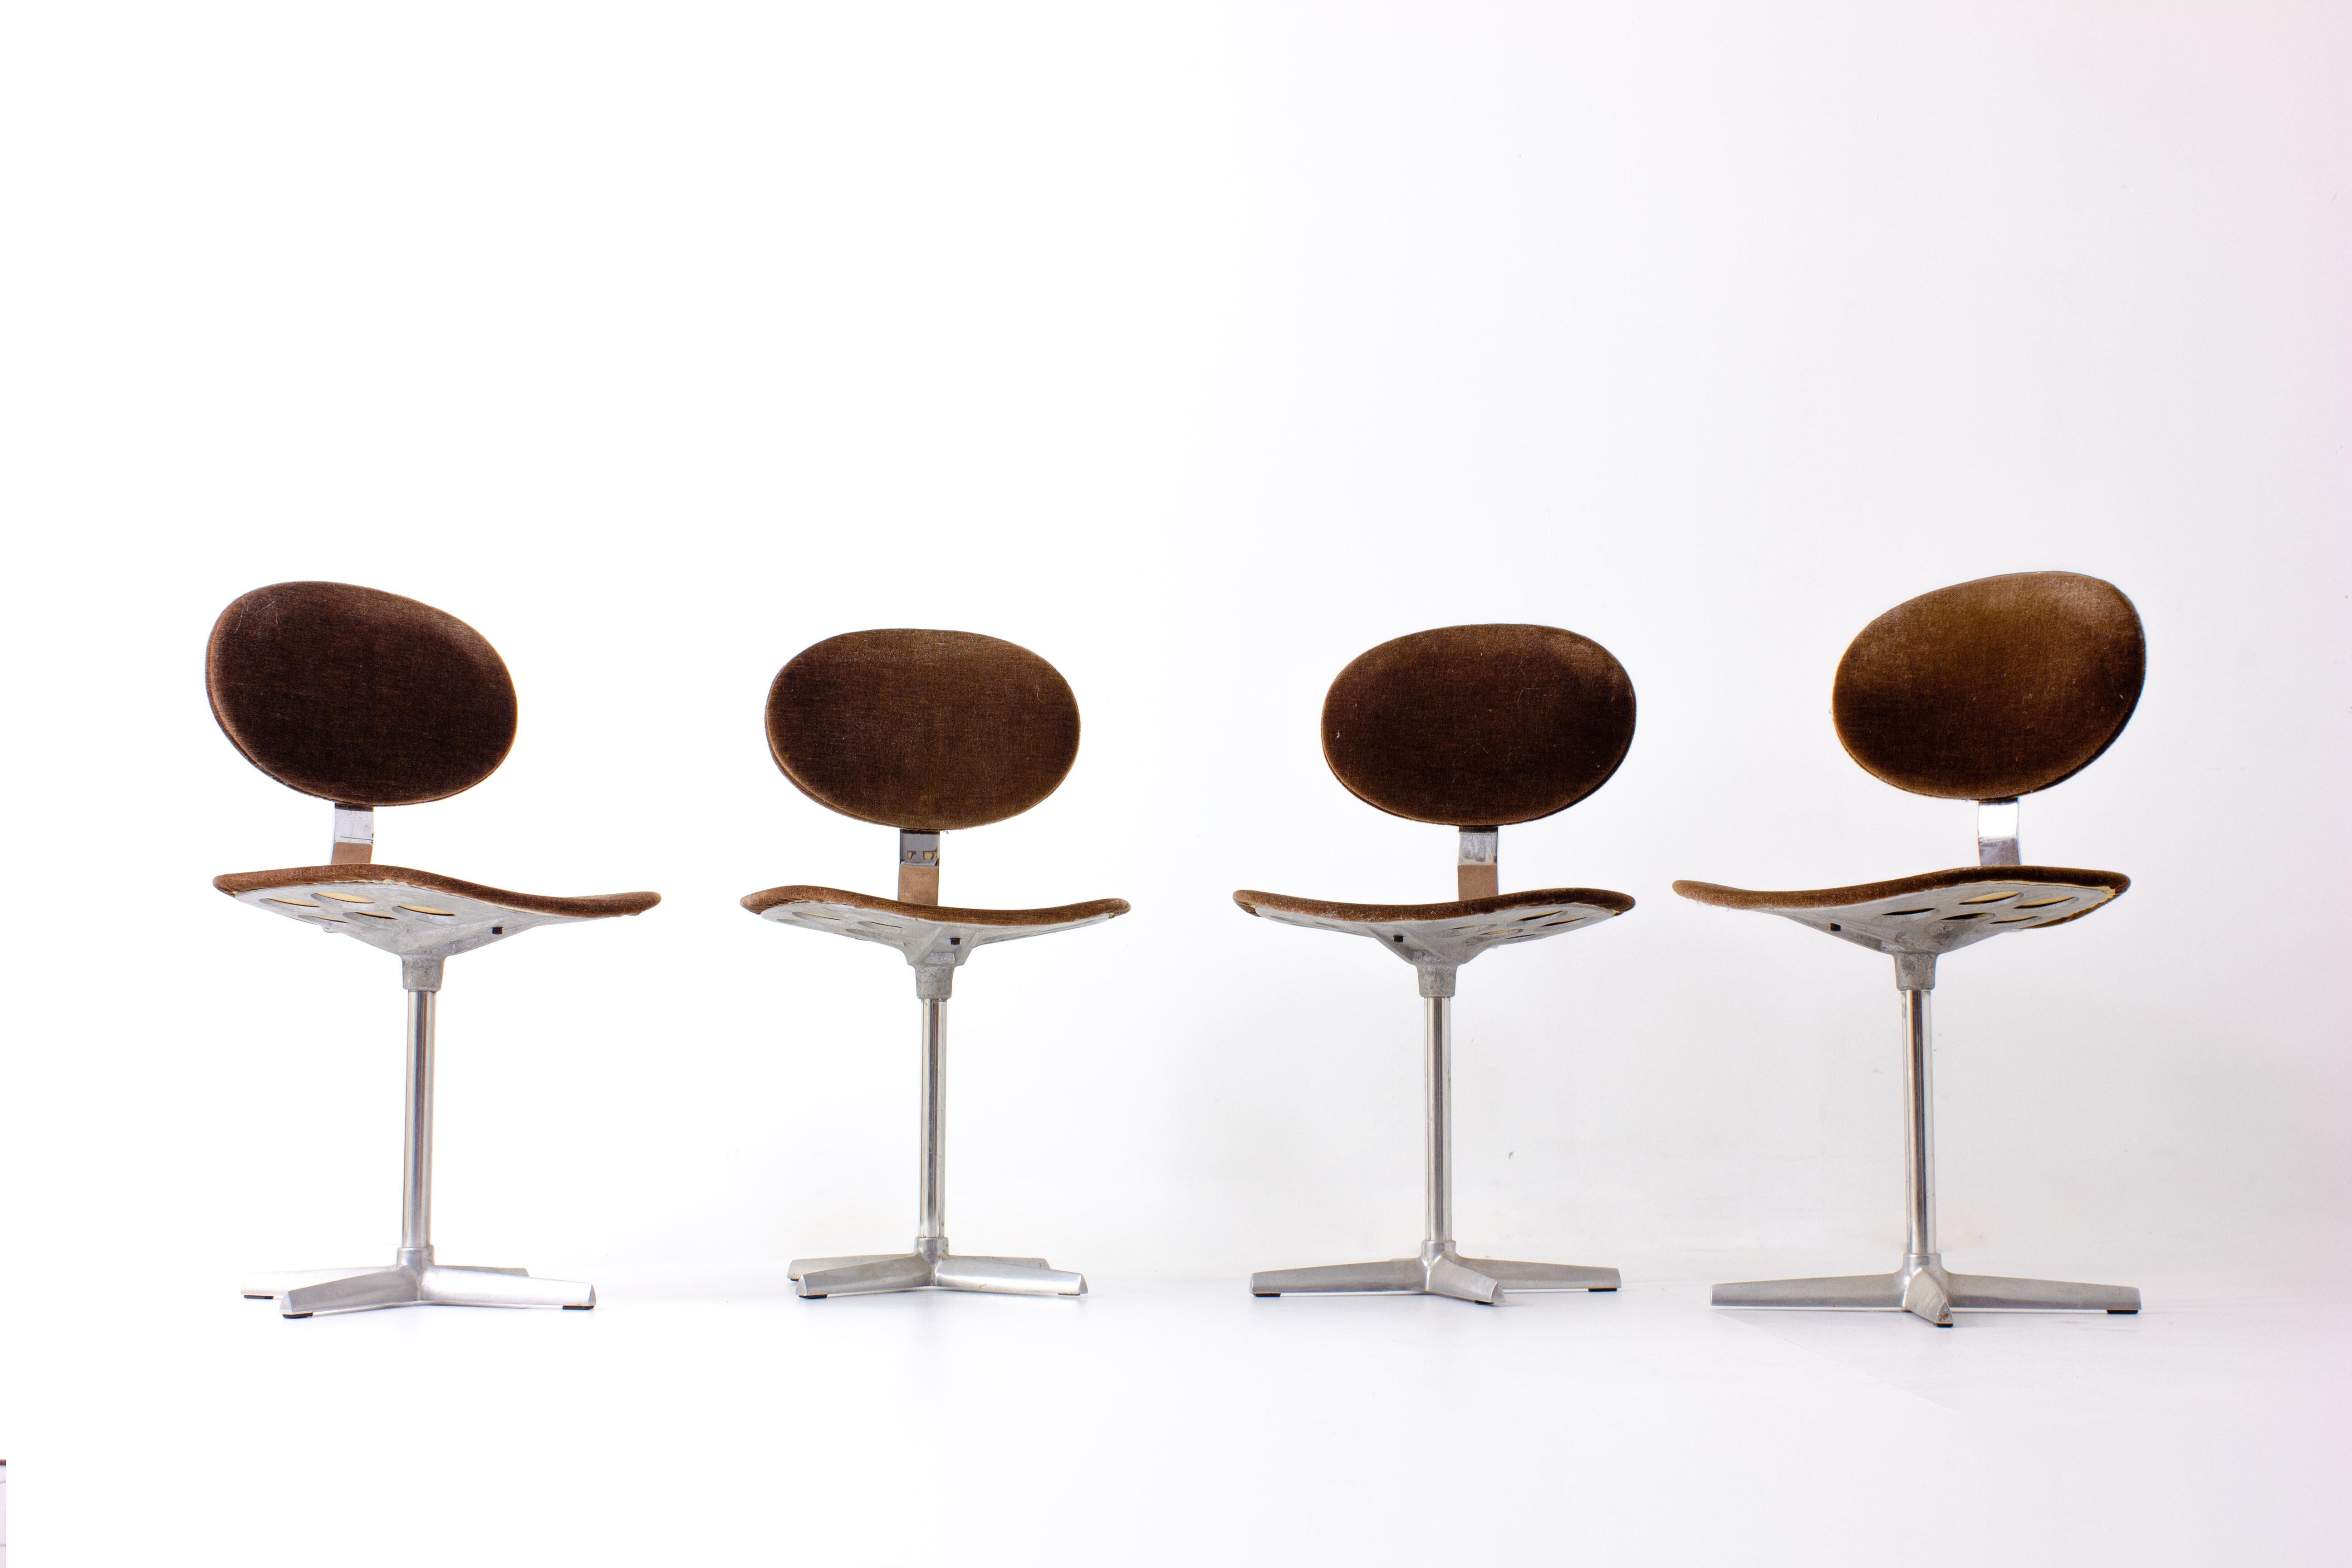 A rare set of 4 Binocle chairs by Georges Vanrijk for Beaufort from the 1960s. These cute looking chairs have two similar looking round shaped surfaces which creates the idea of a pair of binocles. The base is in polished die-cast aluminum, back